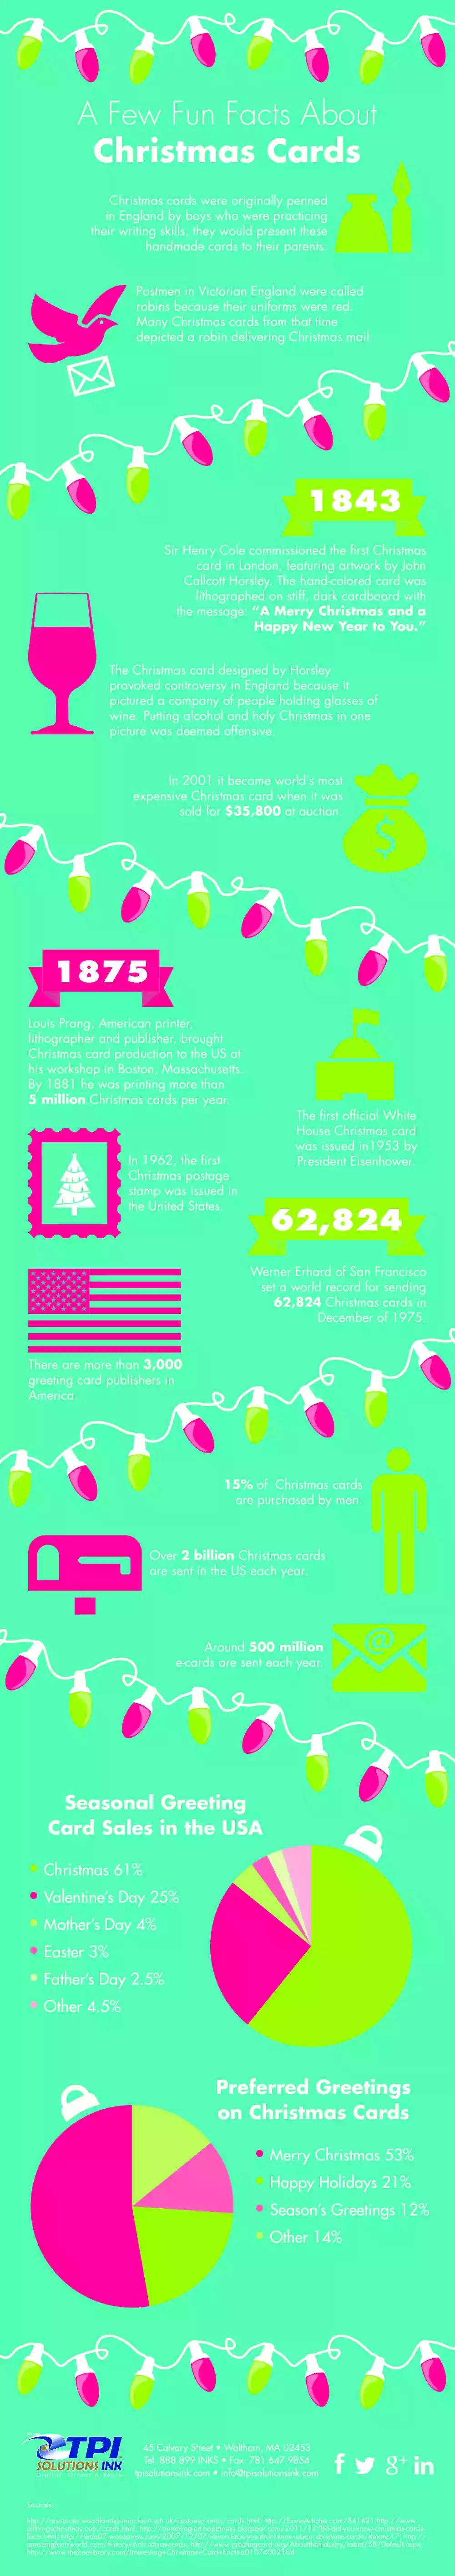 A Few Fun Facts About Christmas Cards